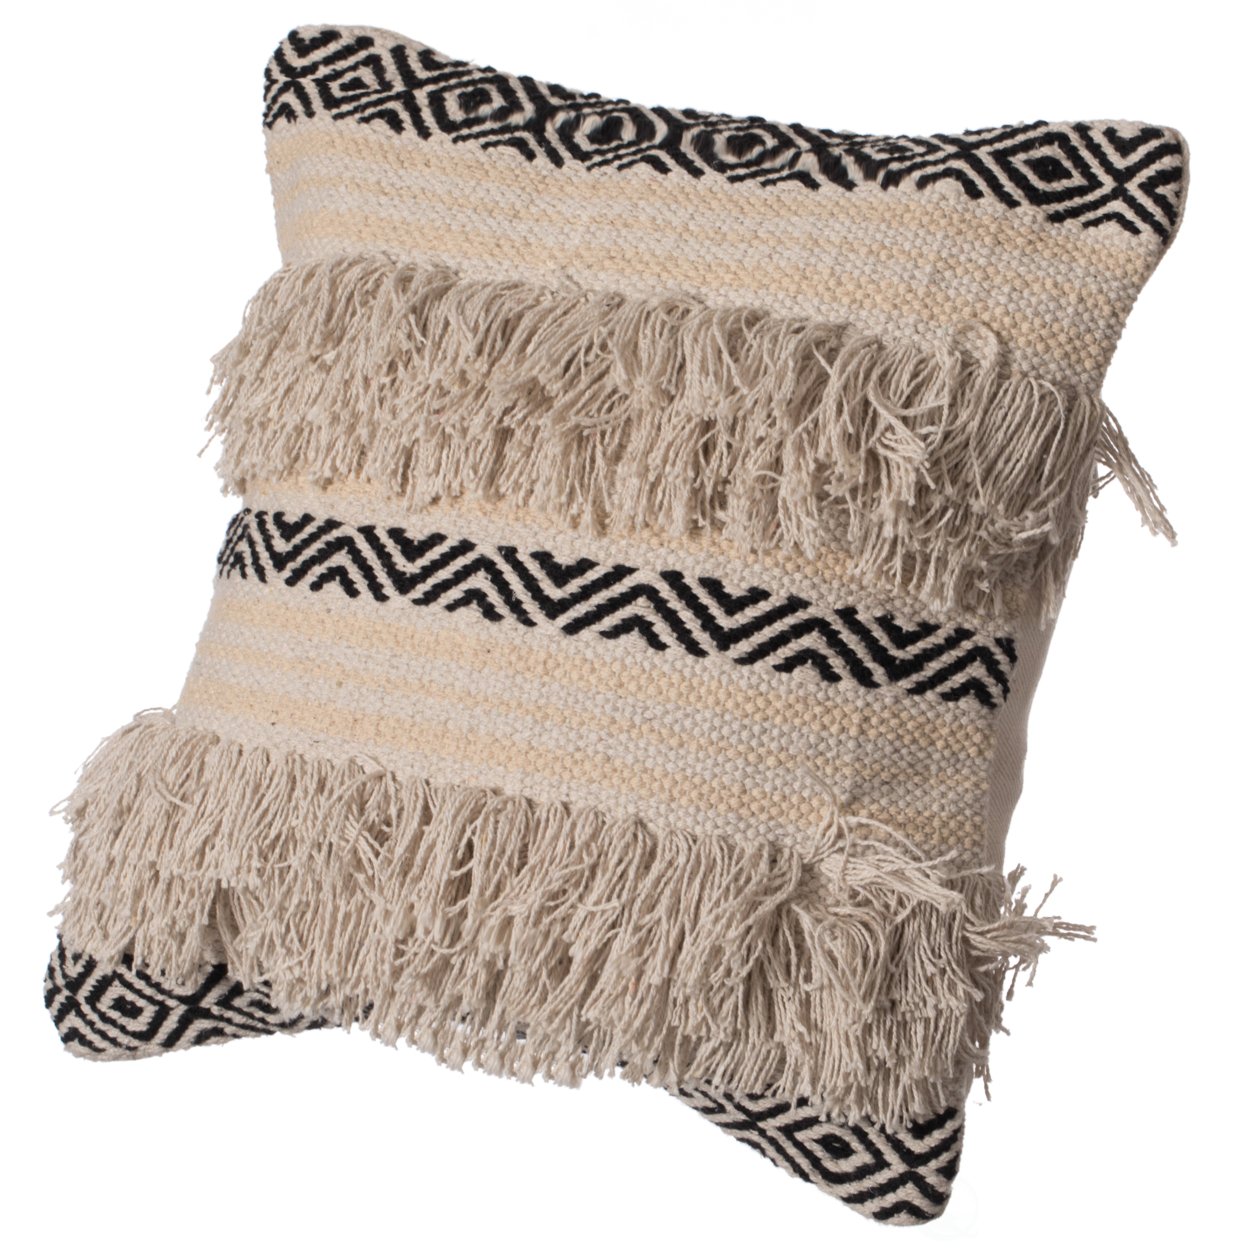 16 Handwoven Cotton Throw Pillow Cover With Boho Design And Fringed Lines - Pillowcase Only